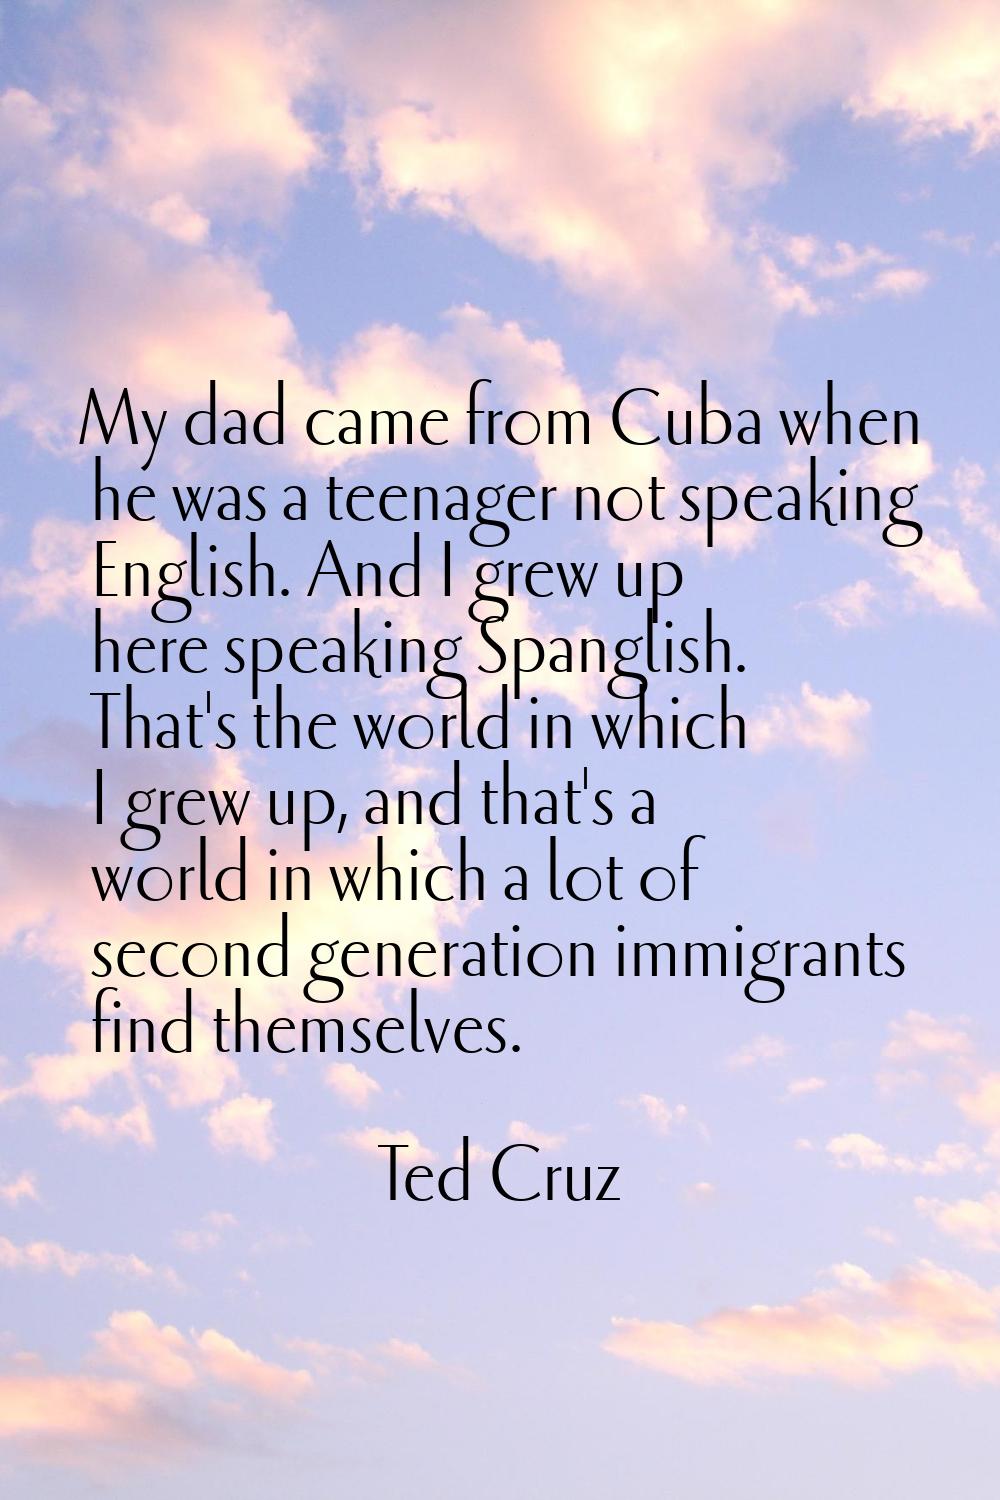 My dad came from Cuba when he was a teenager not speaking English. And I grew up here speaking Span